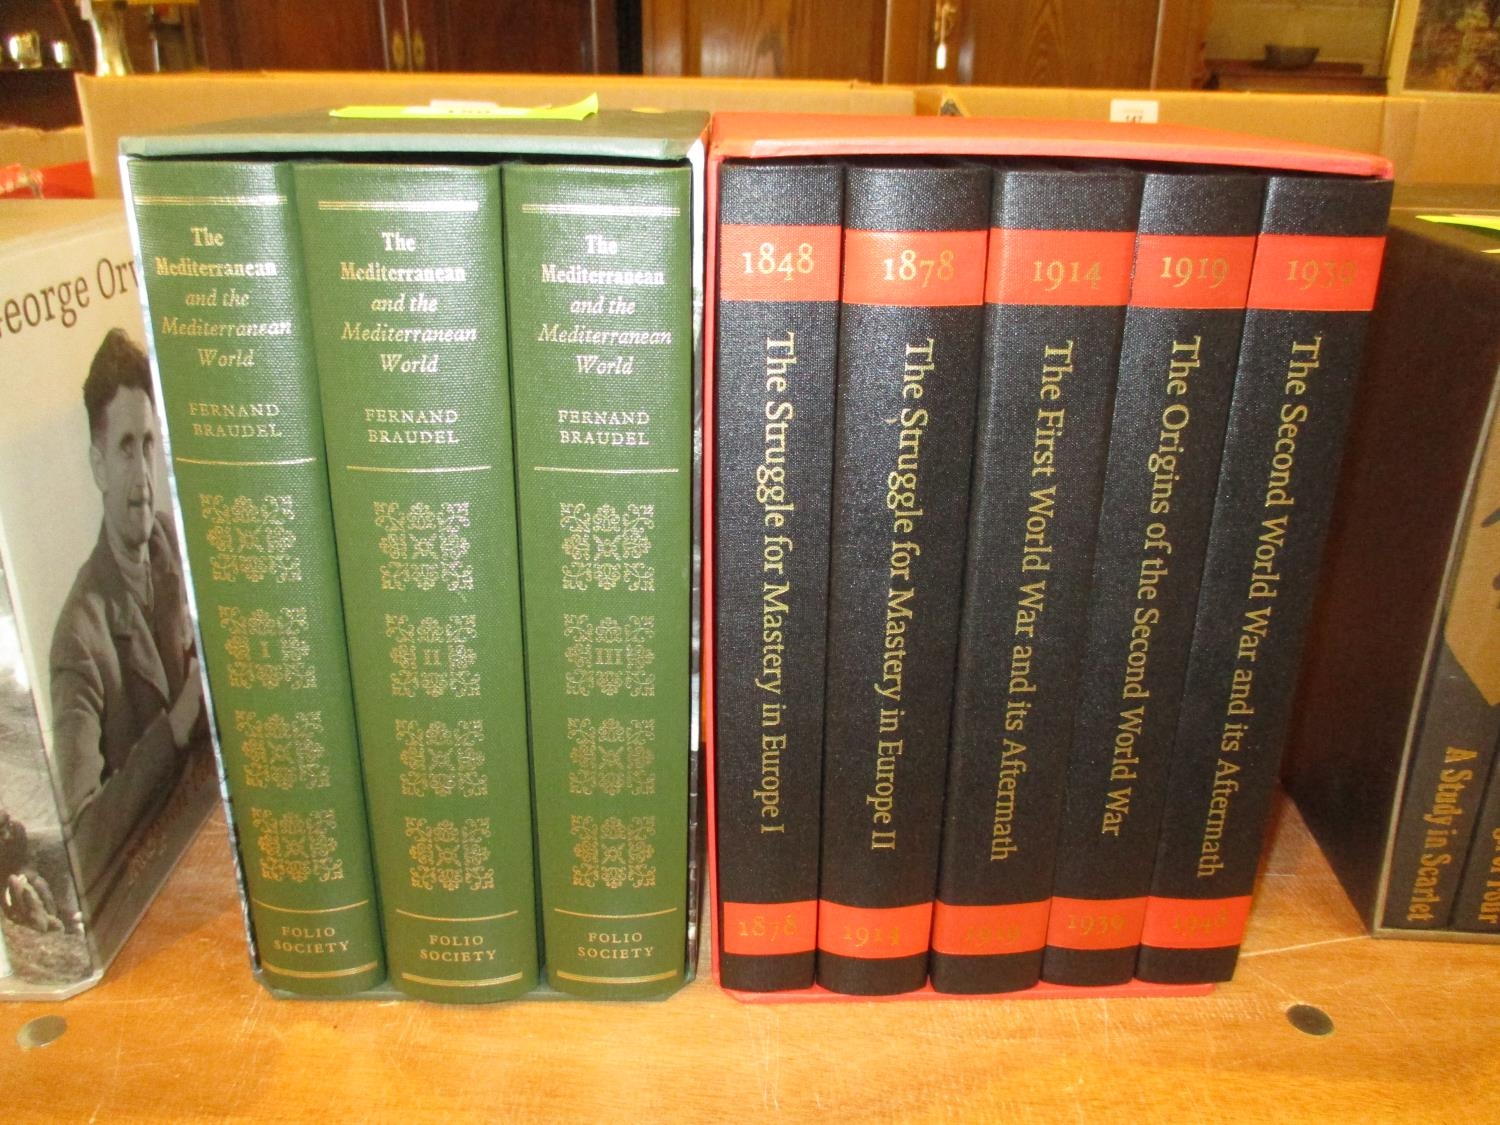 Two Boxed Sets of Folio Society Books - A Century of Conflict and The Mediterranean